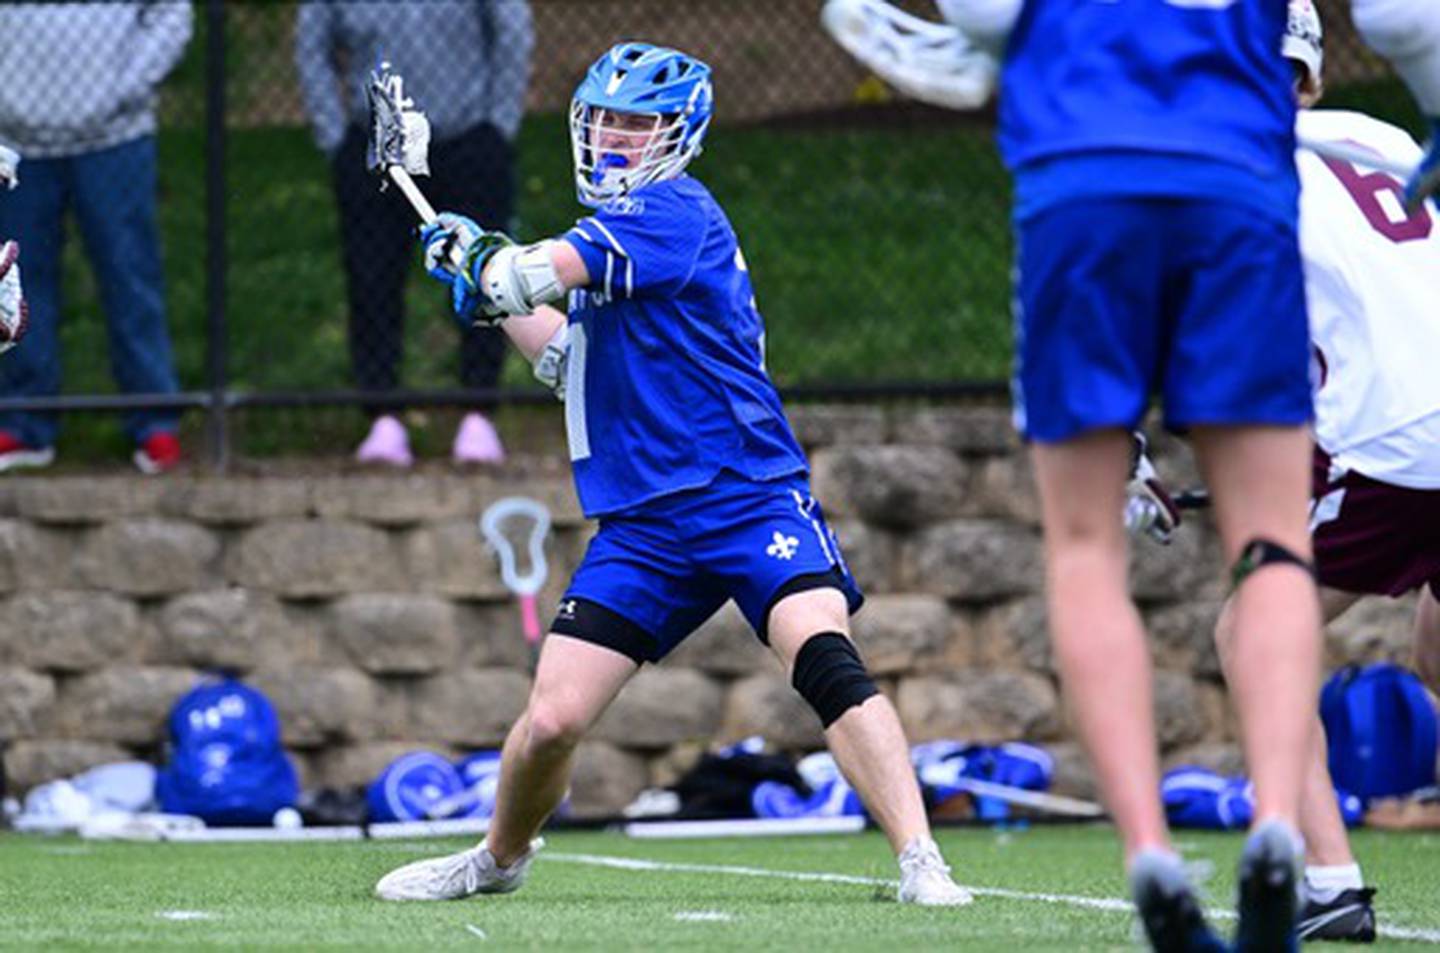 Bobby Keane prepares to fire a shot during Tuesday's MIAA A Conference lacrosse match between St. Mary's and Boys' Latin. The Saint senior, who's bound to High Point University, scored five goals as No. 6 St. Mary's defeated the third-ranked Lakers, 10-9, at J. Duncan Smith Field in Roland Park.